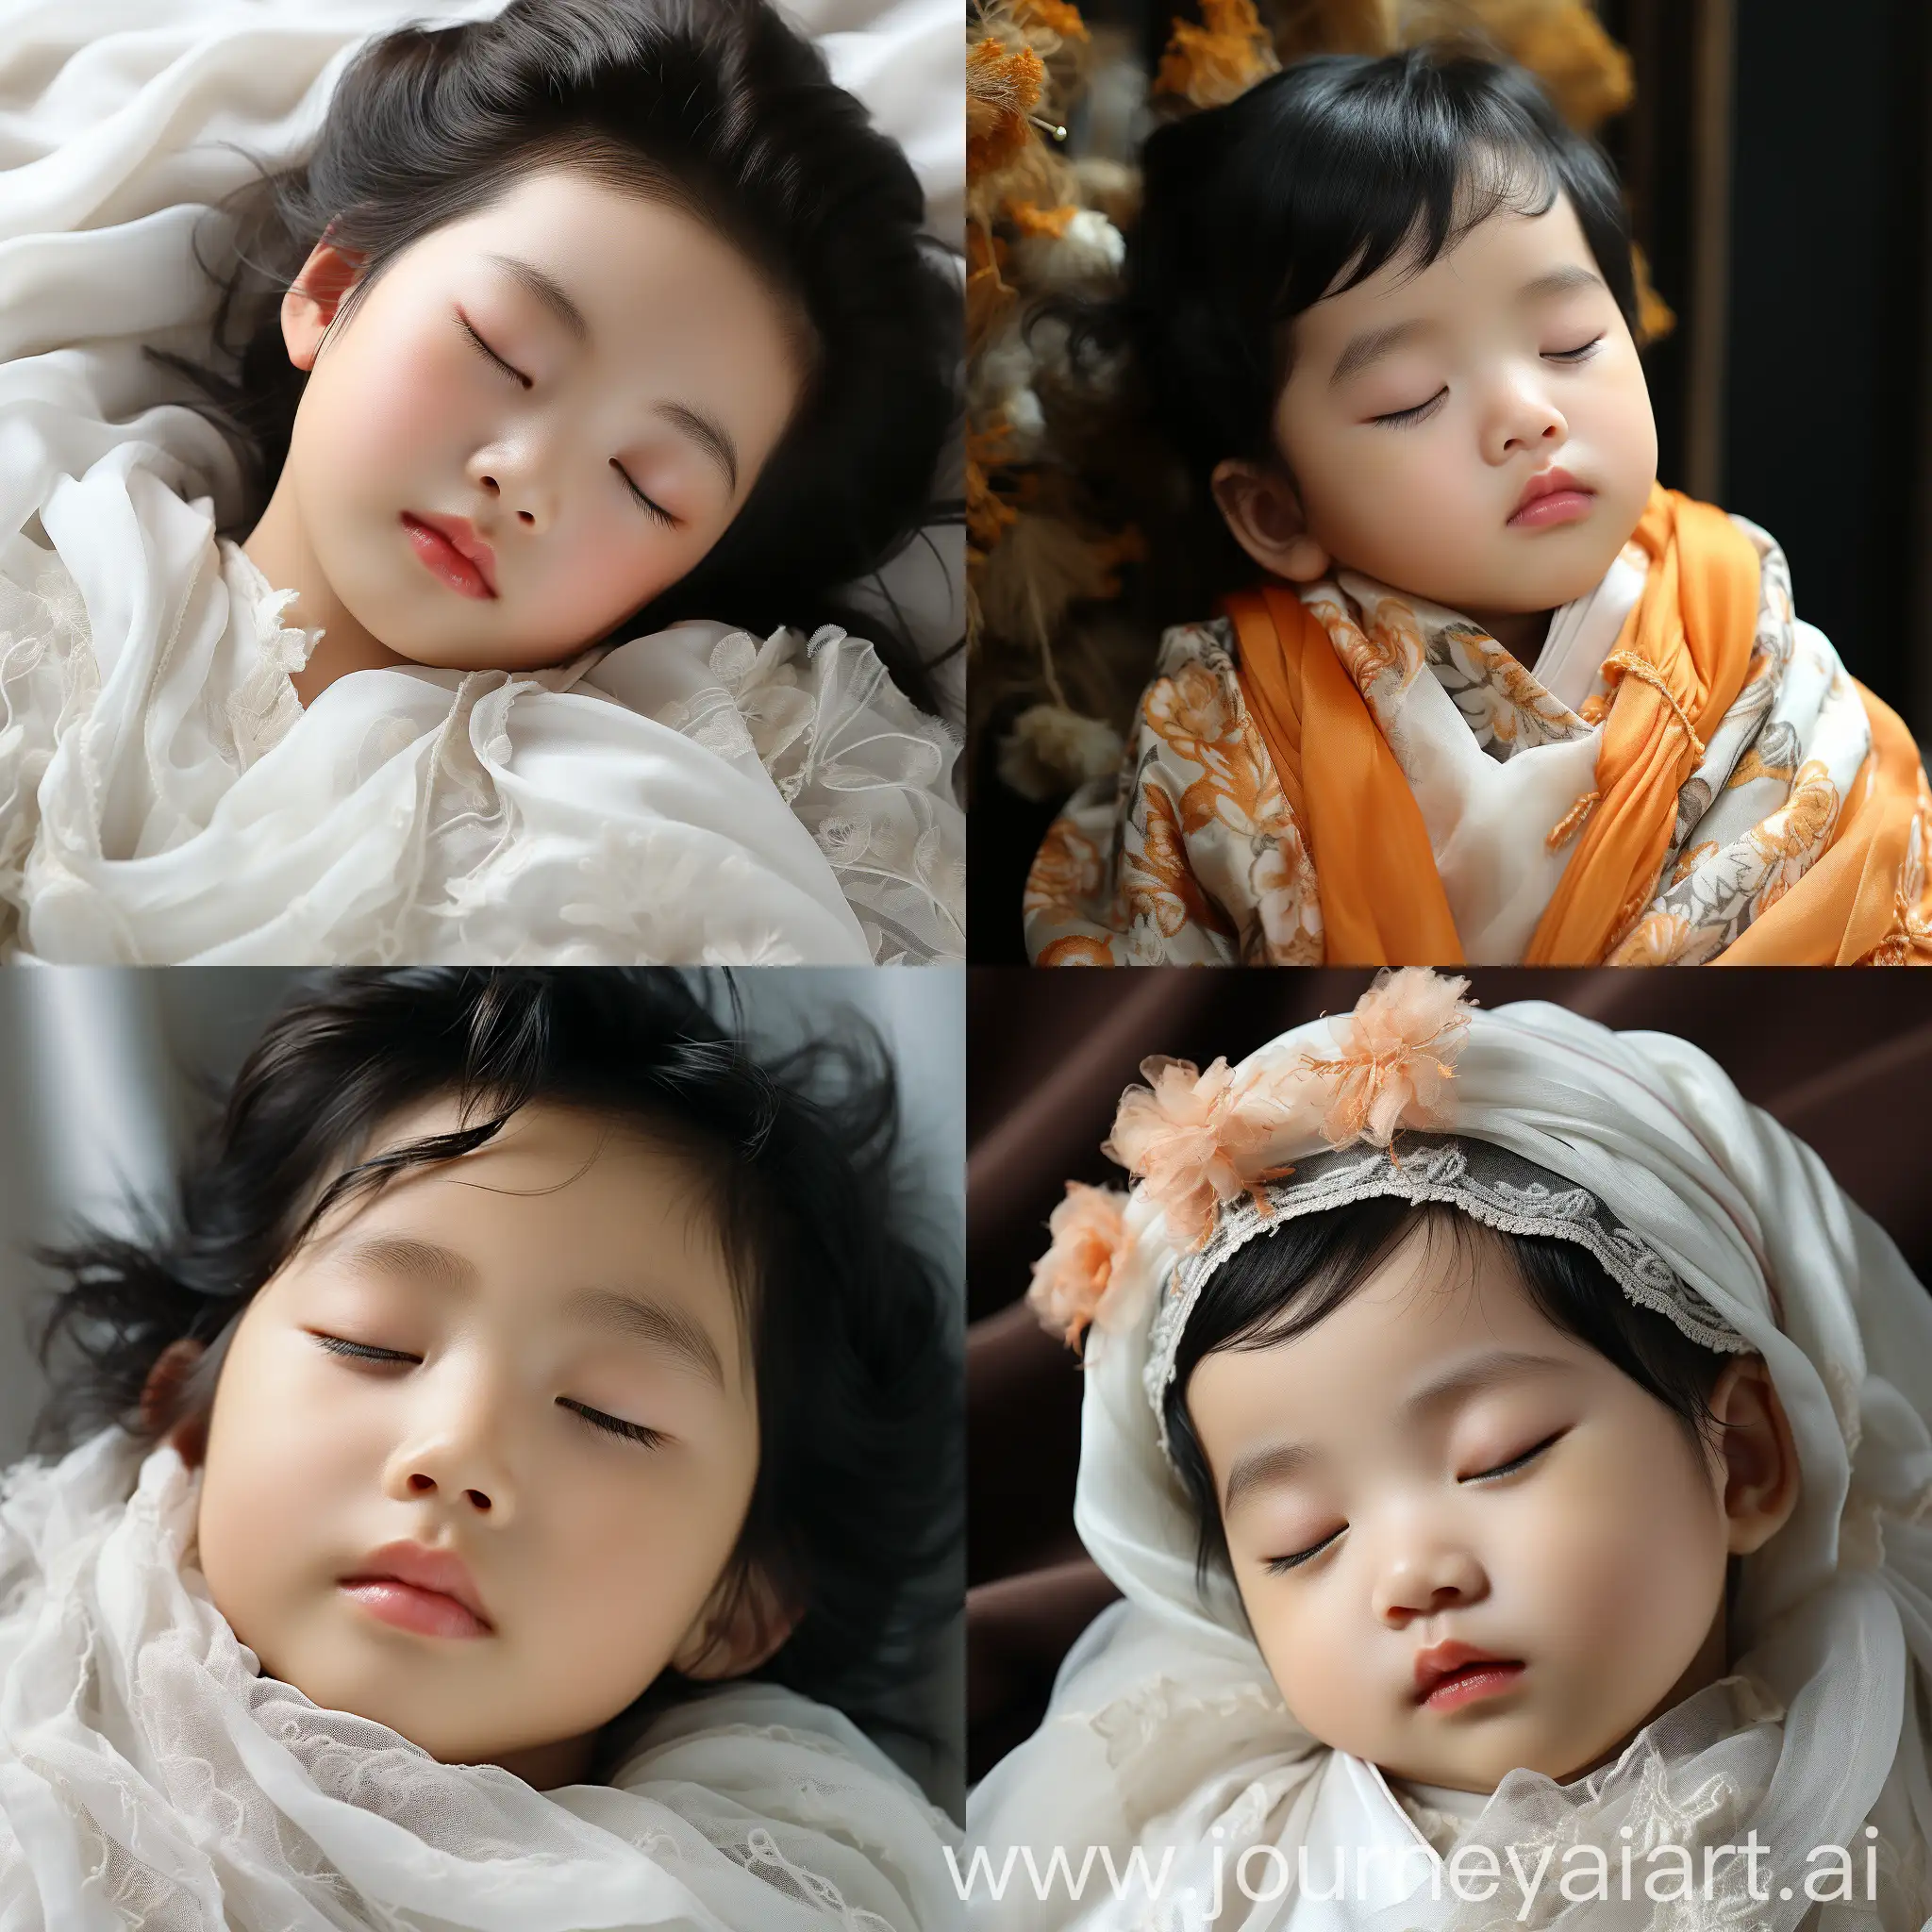 Peaceful-Chinese-Newborn-Baby-Sleeping-in-Delicate-Clothing